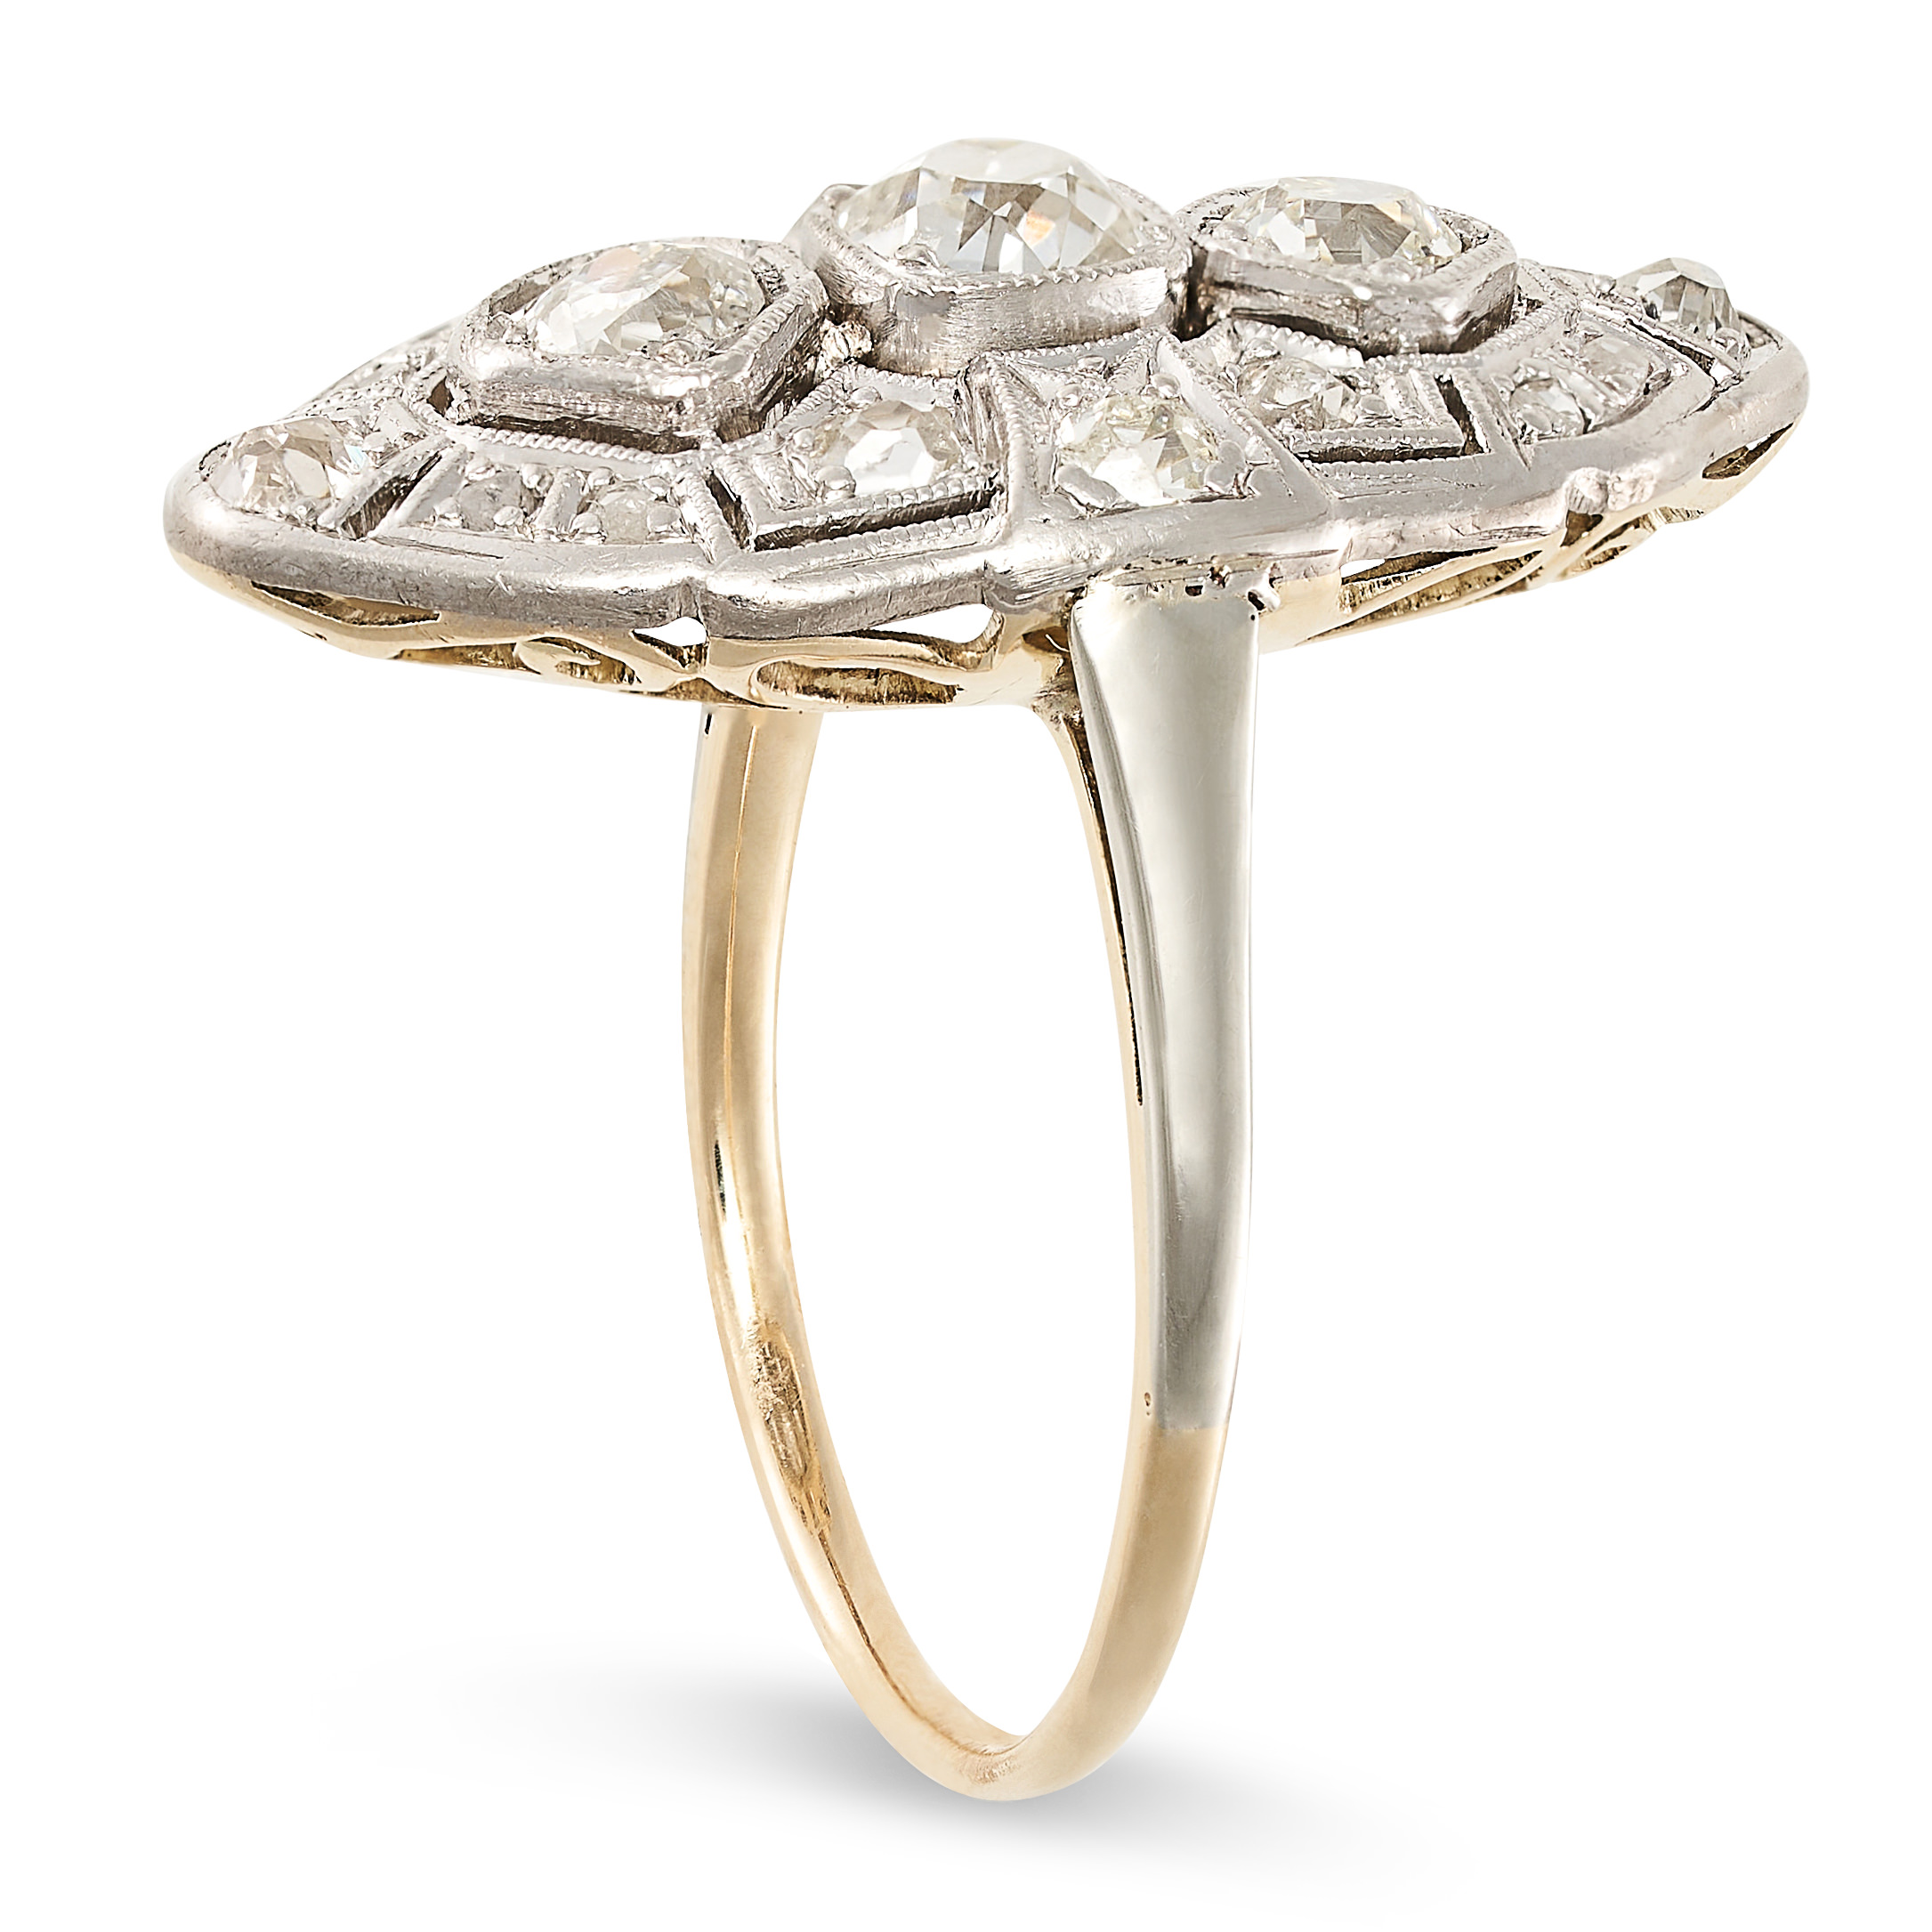 A DIAMOND PLAQUE RING, EARLY 20TH CENTURY set with three central old mine cut diamonds, accented - Image 2 of 2